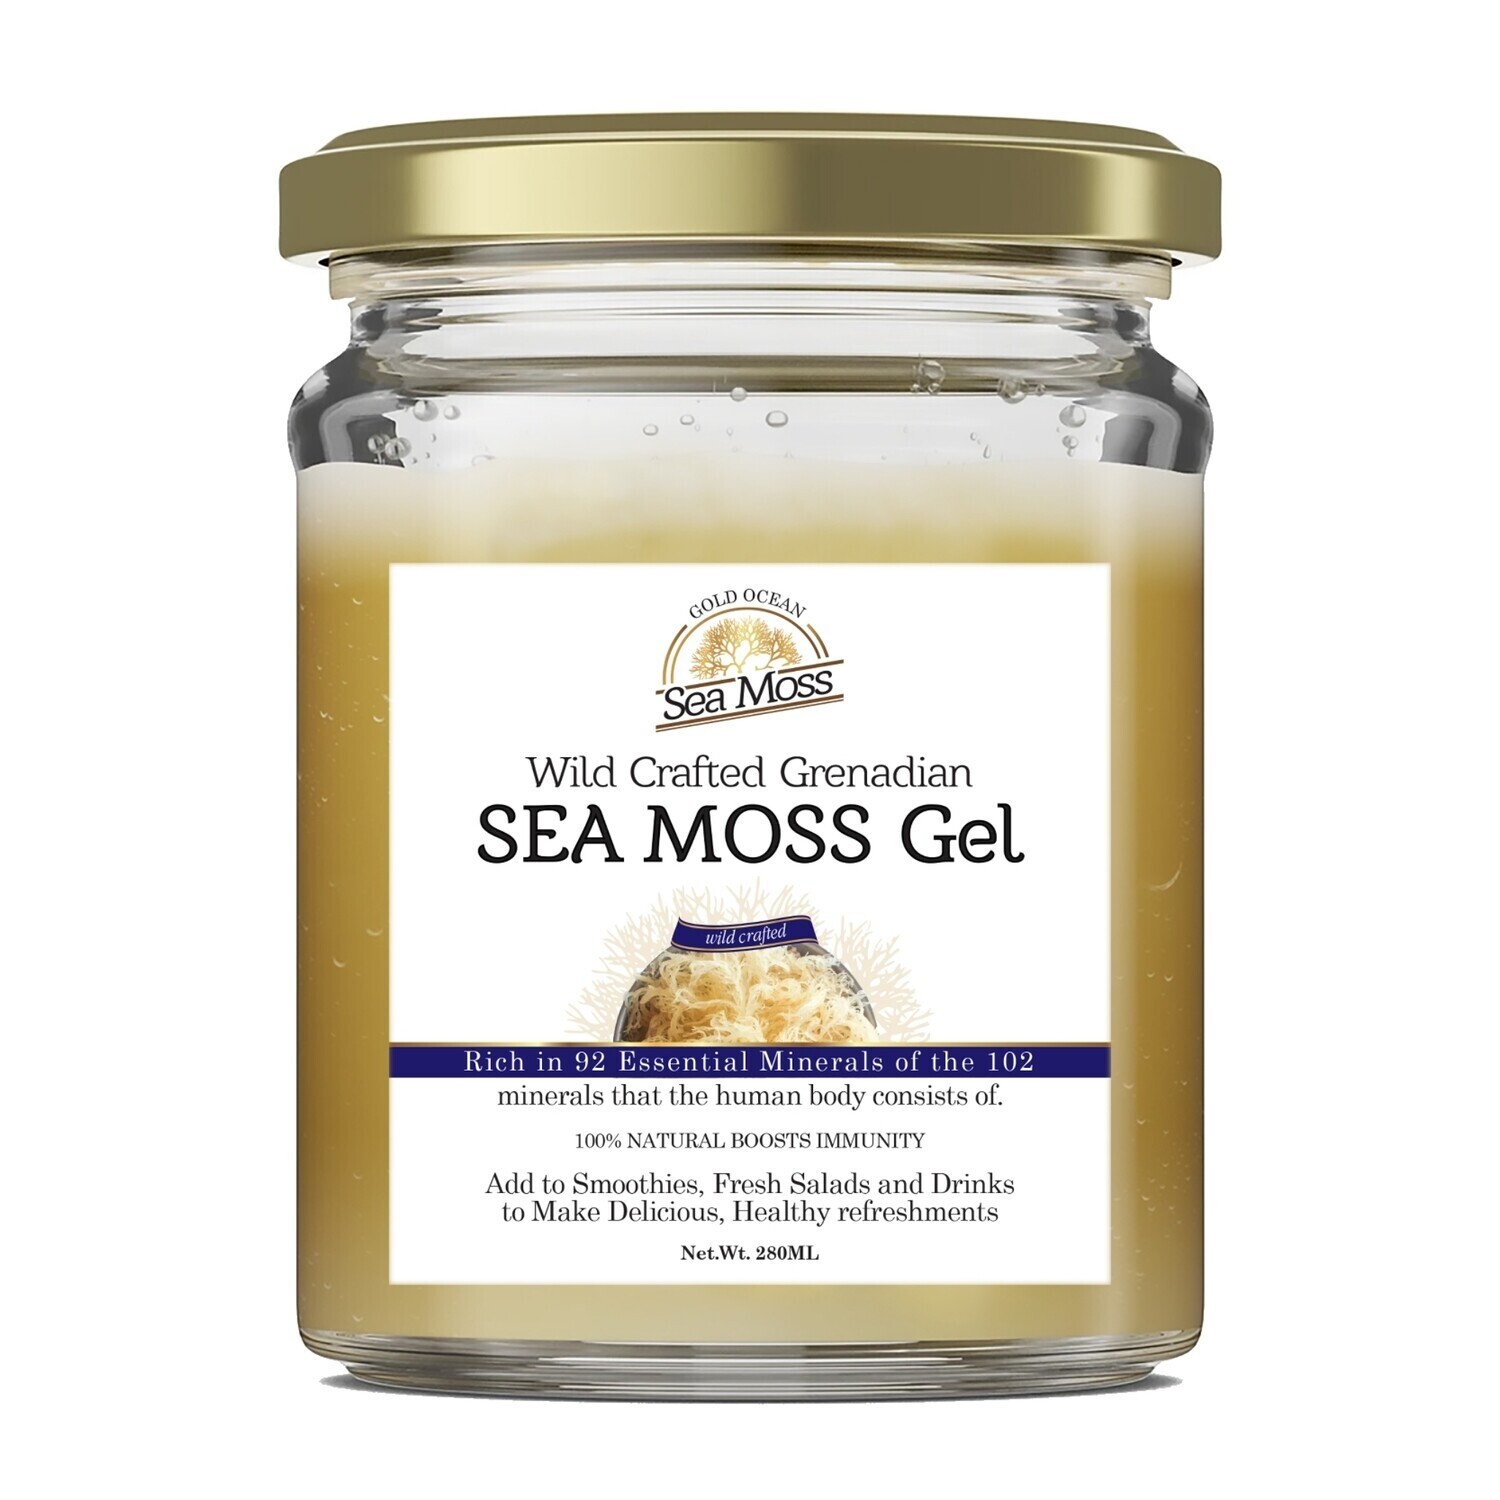 Grenadian sea moss infused with Activated Black Charcoal 280ml